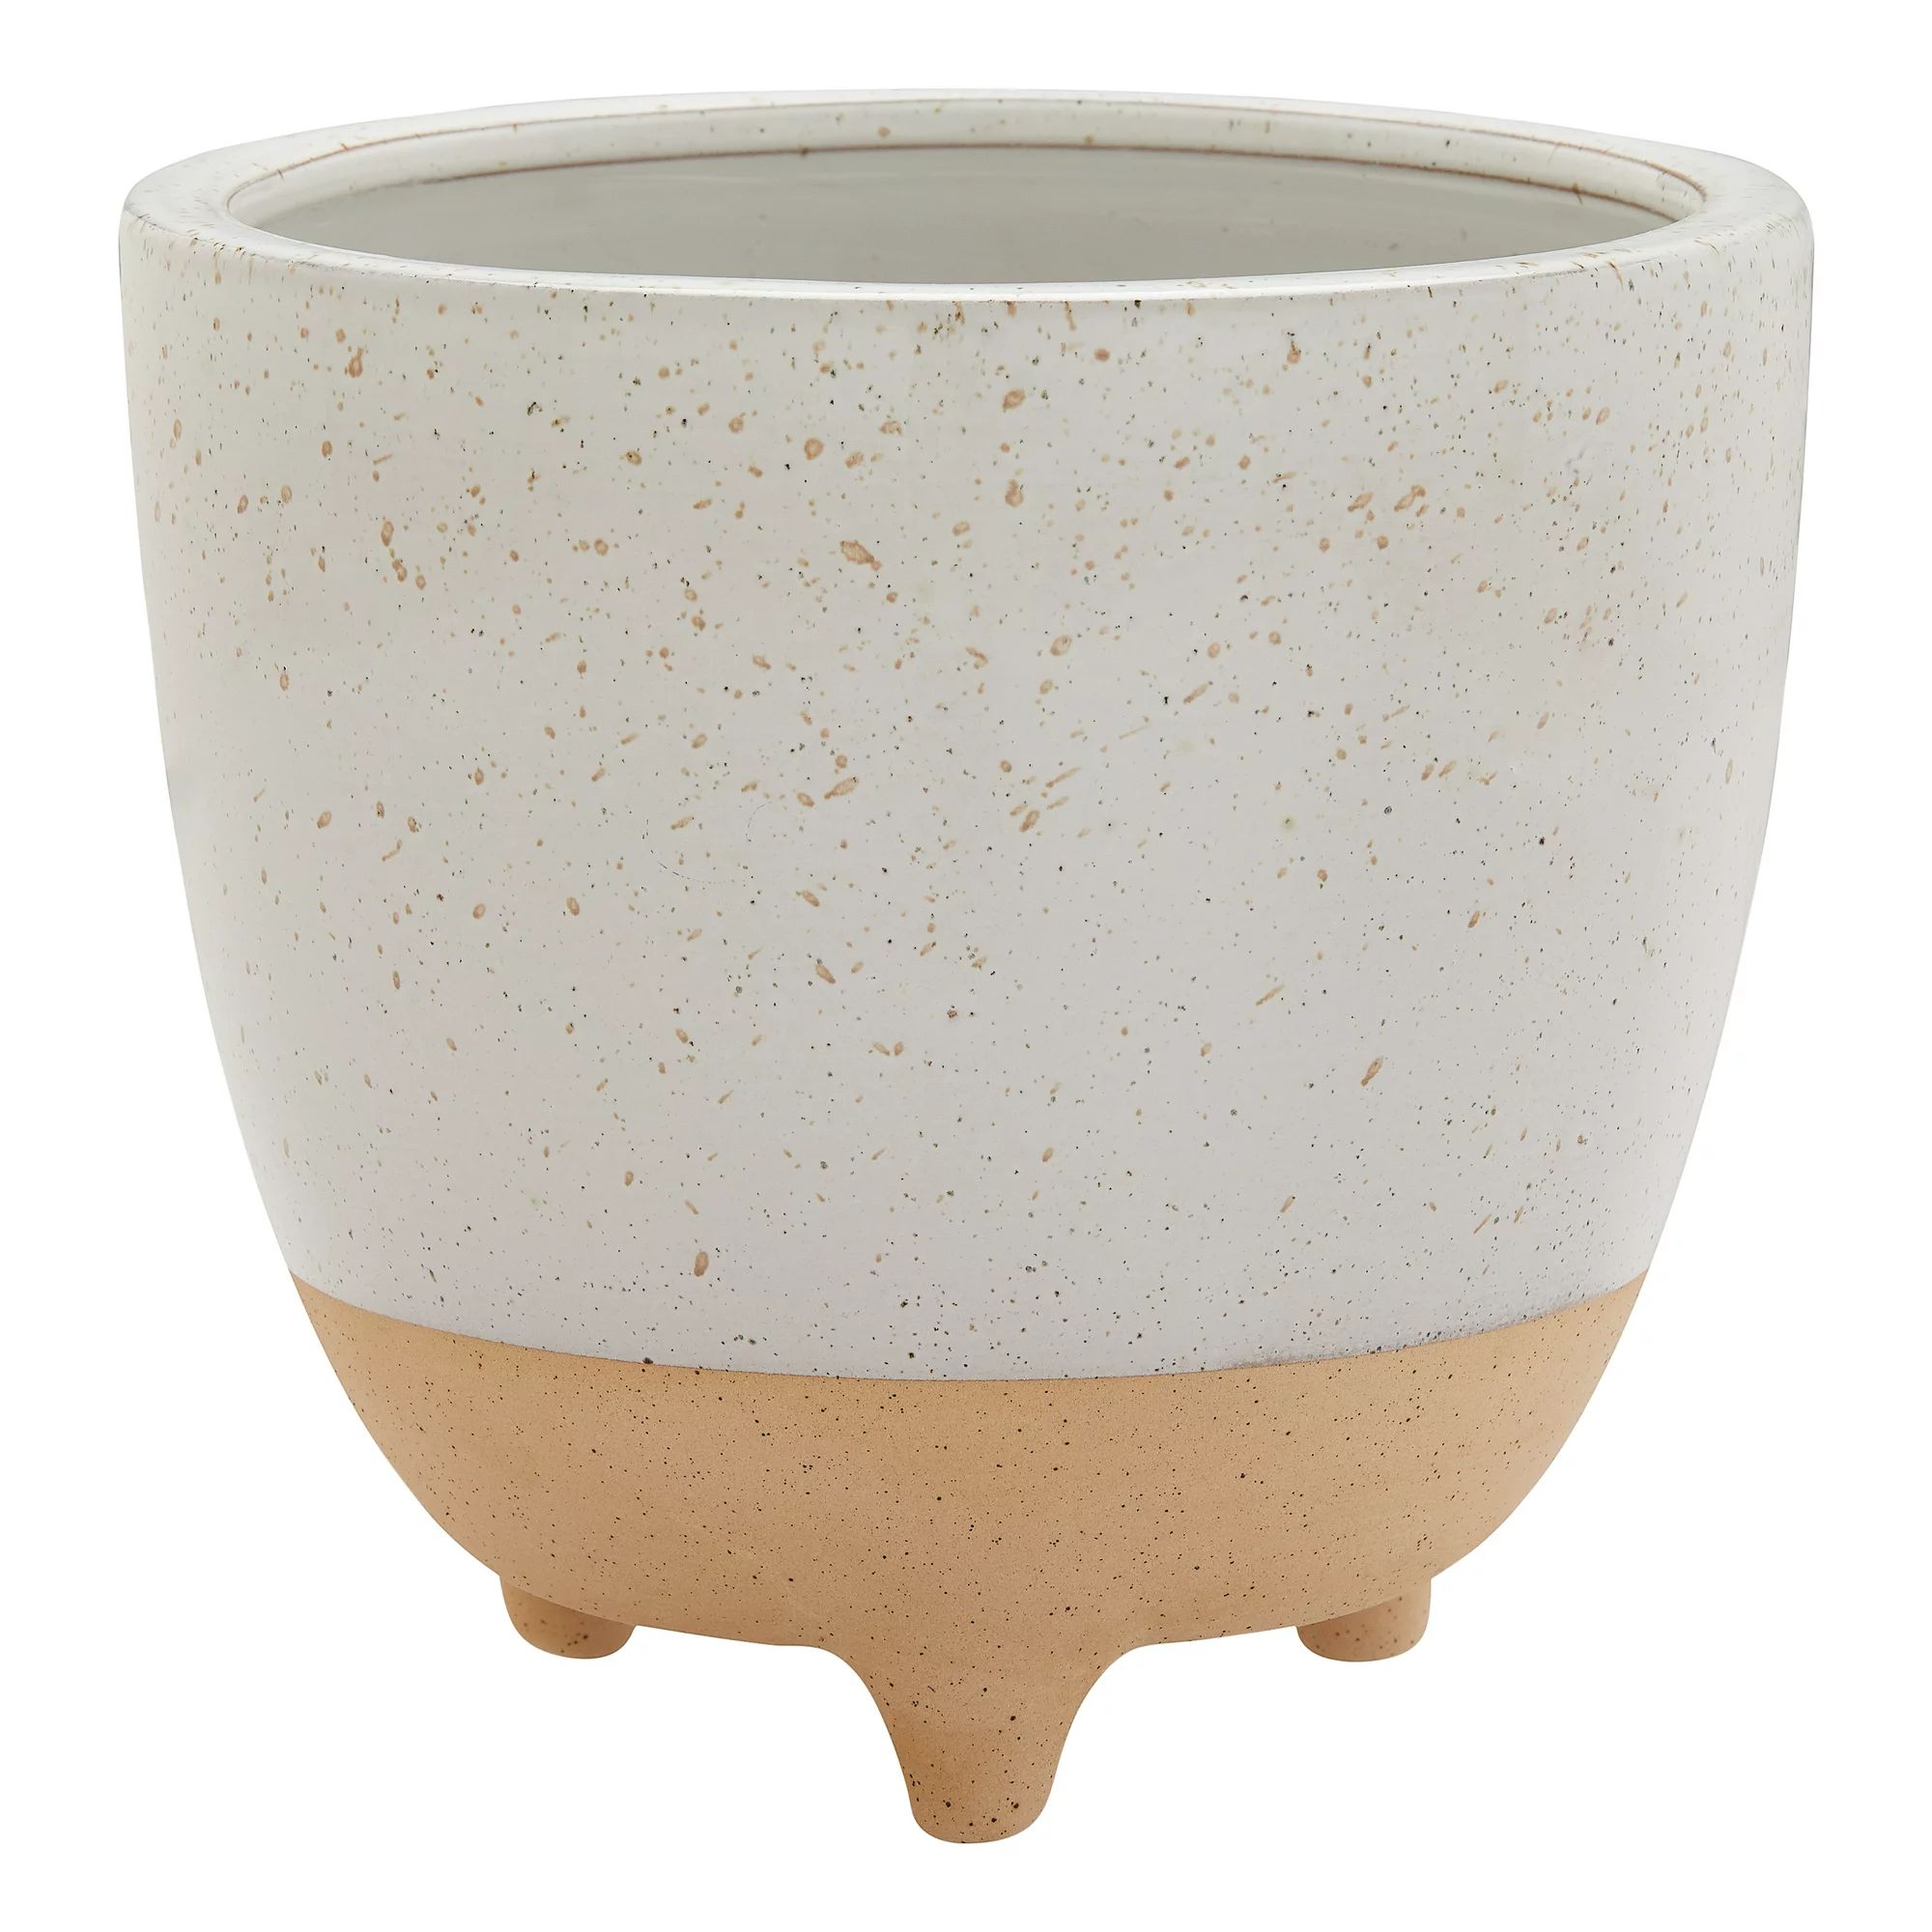 Better Homes & Gardens Two-Toned Speckled Ceramic Planter, 10" | Walmart (US)